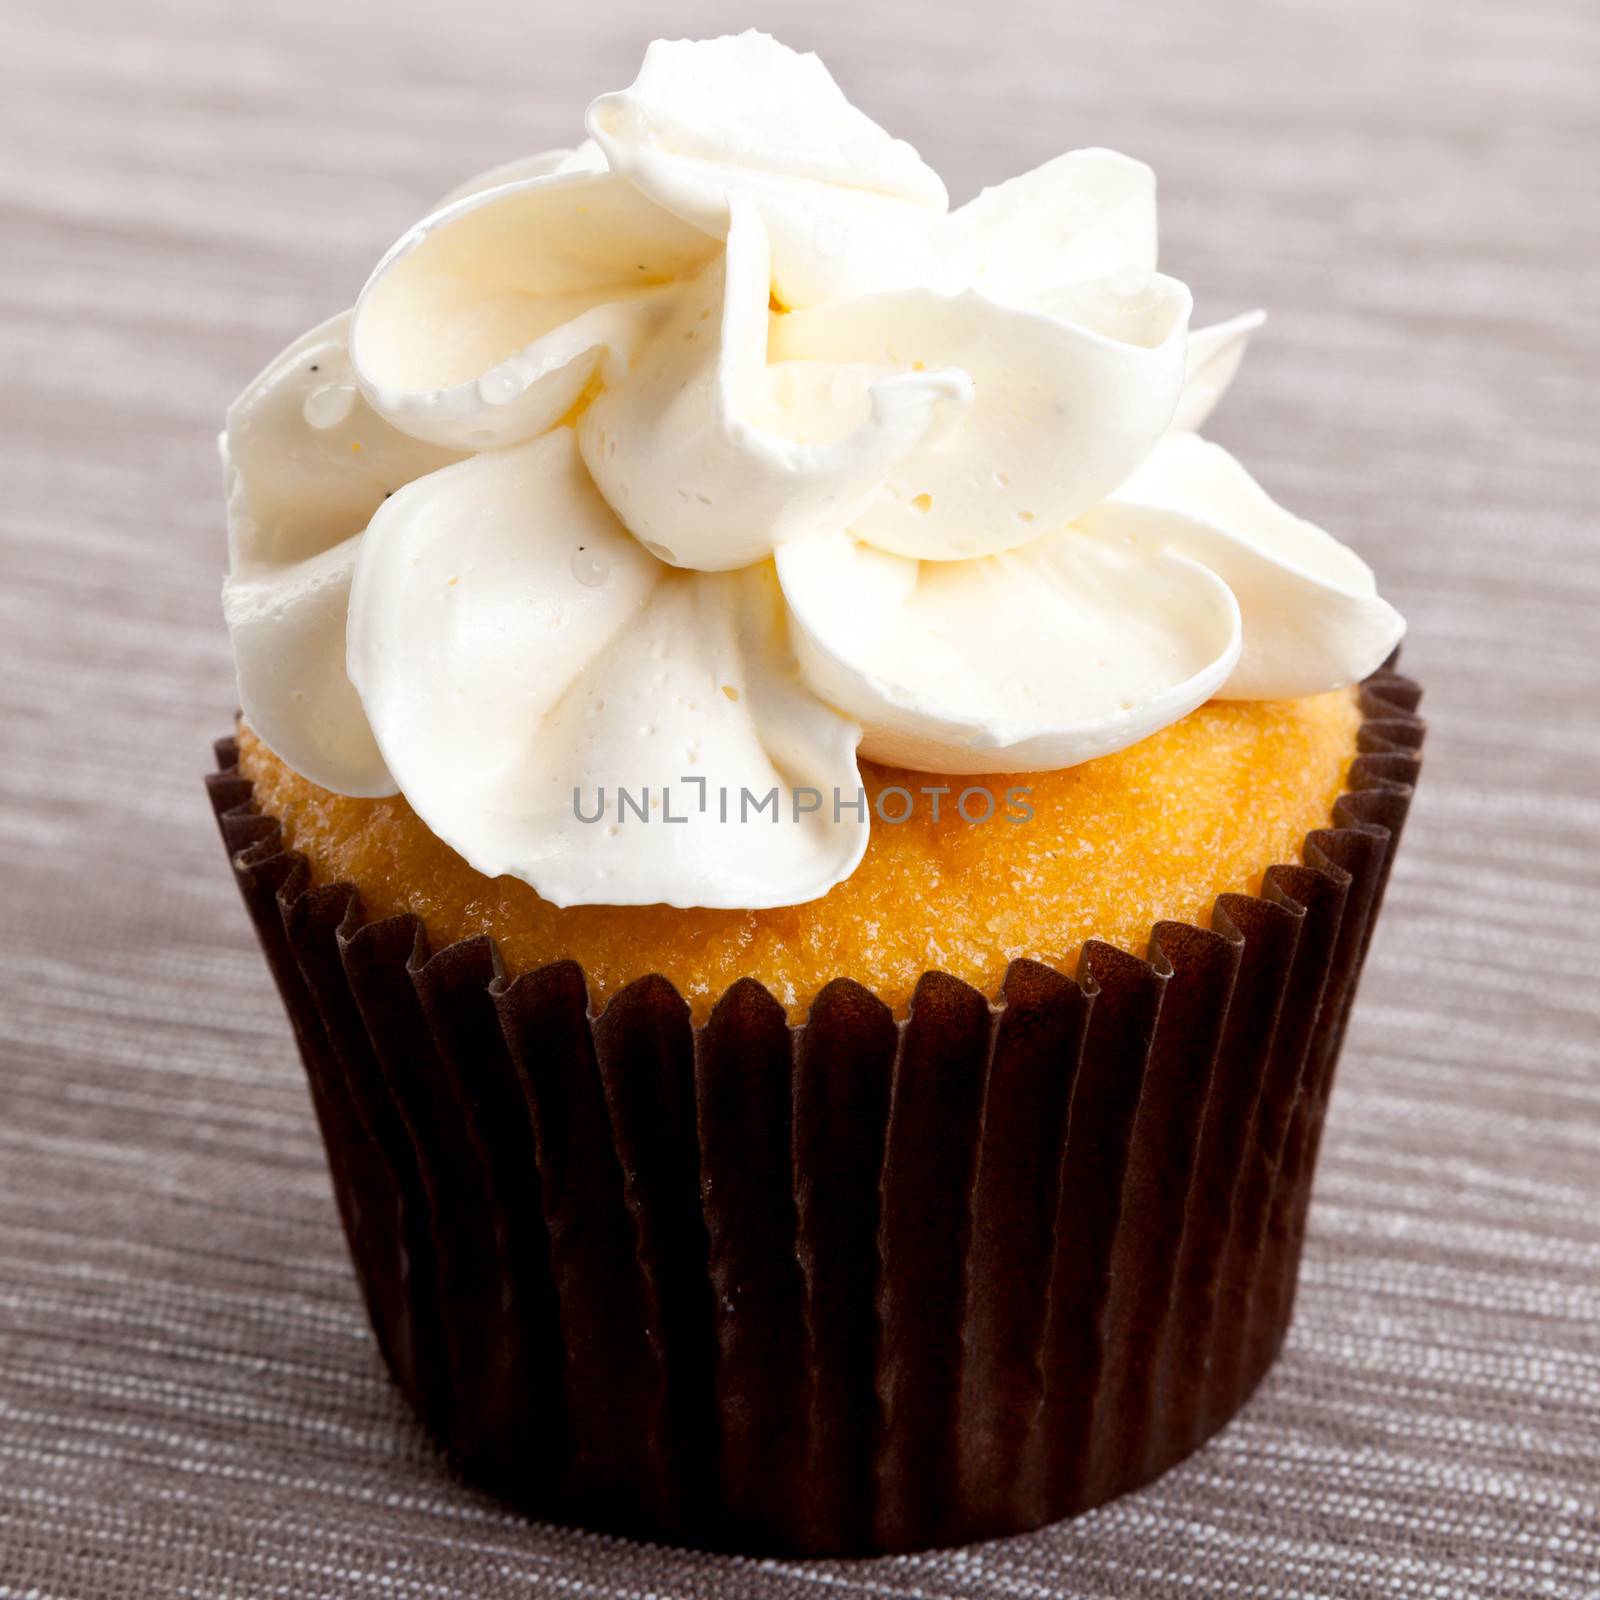 tasty sweet homemade cupcakes with cream on table food candy muffin